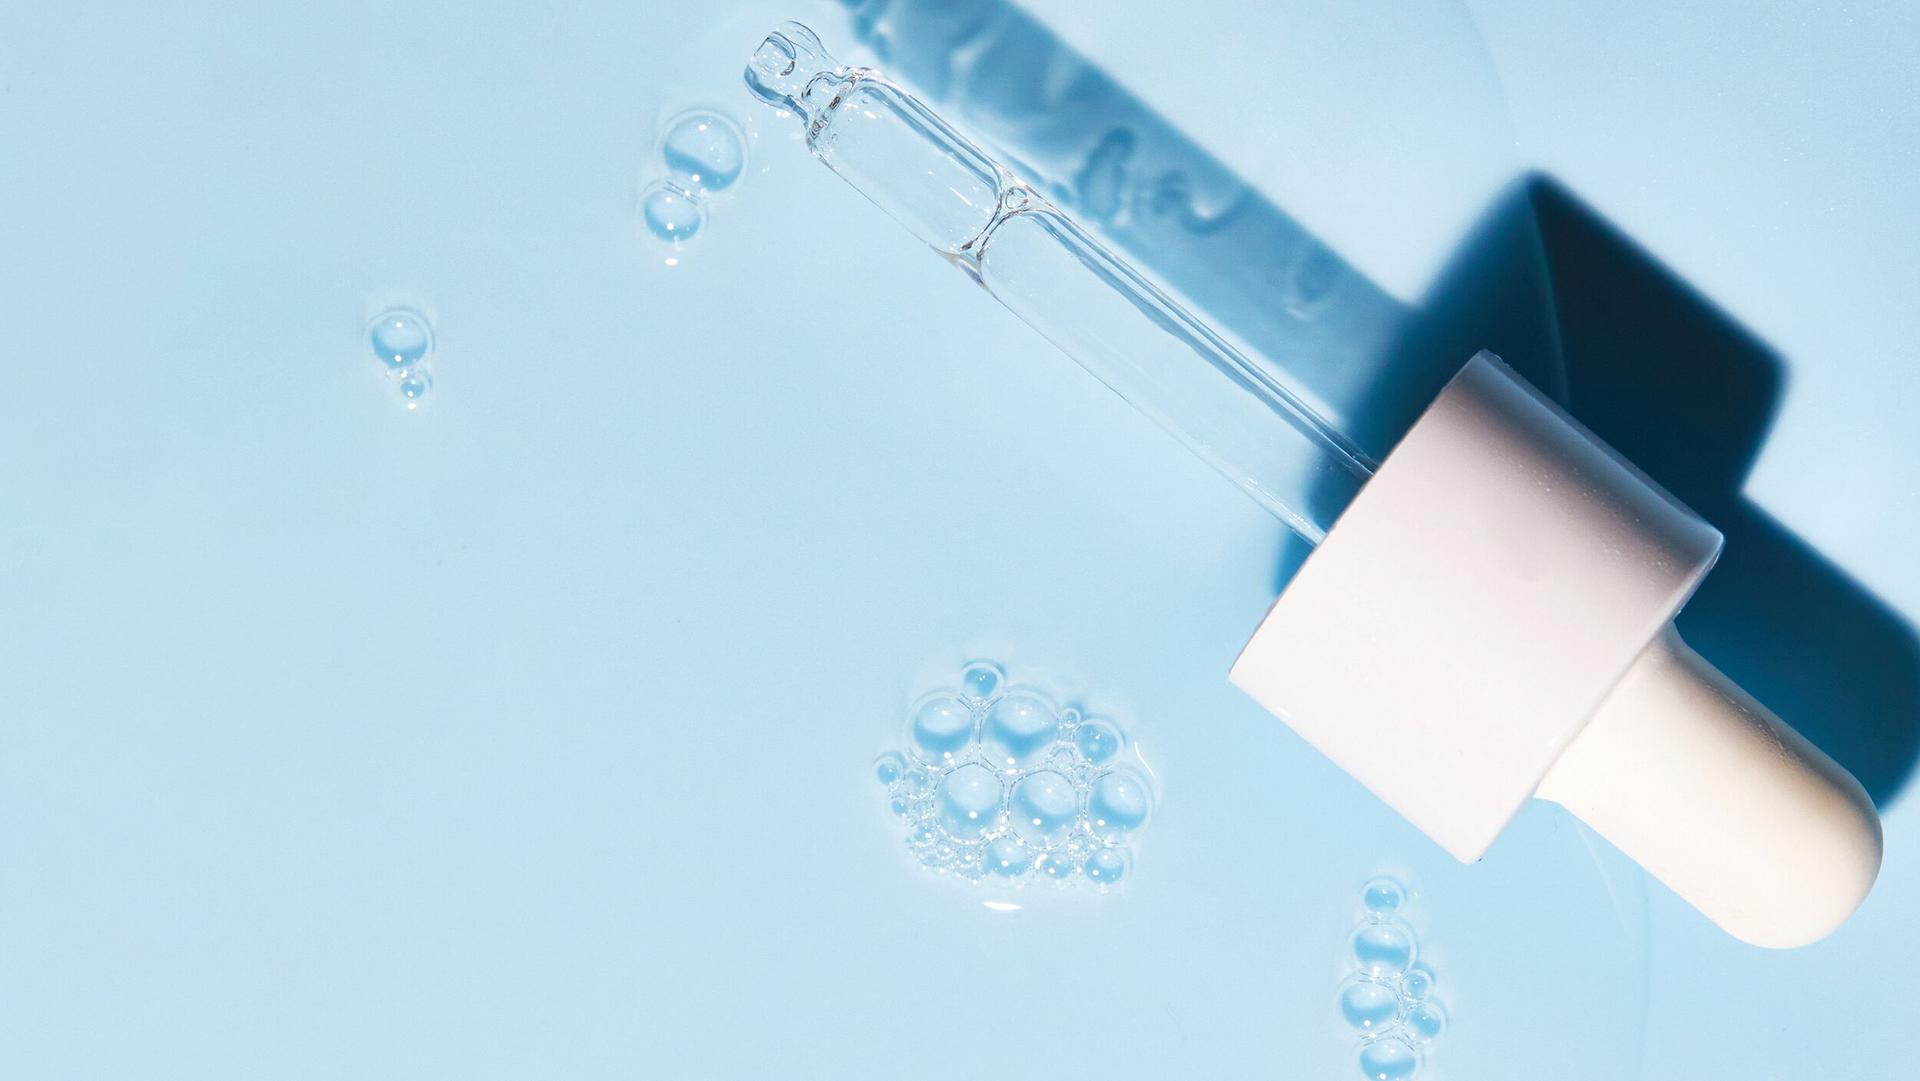 Serum pipette with a blue background